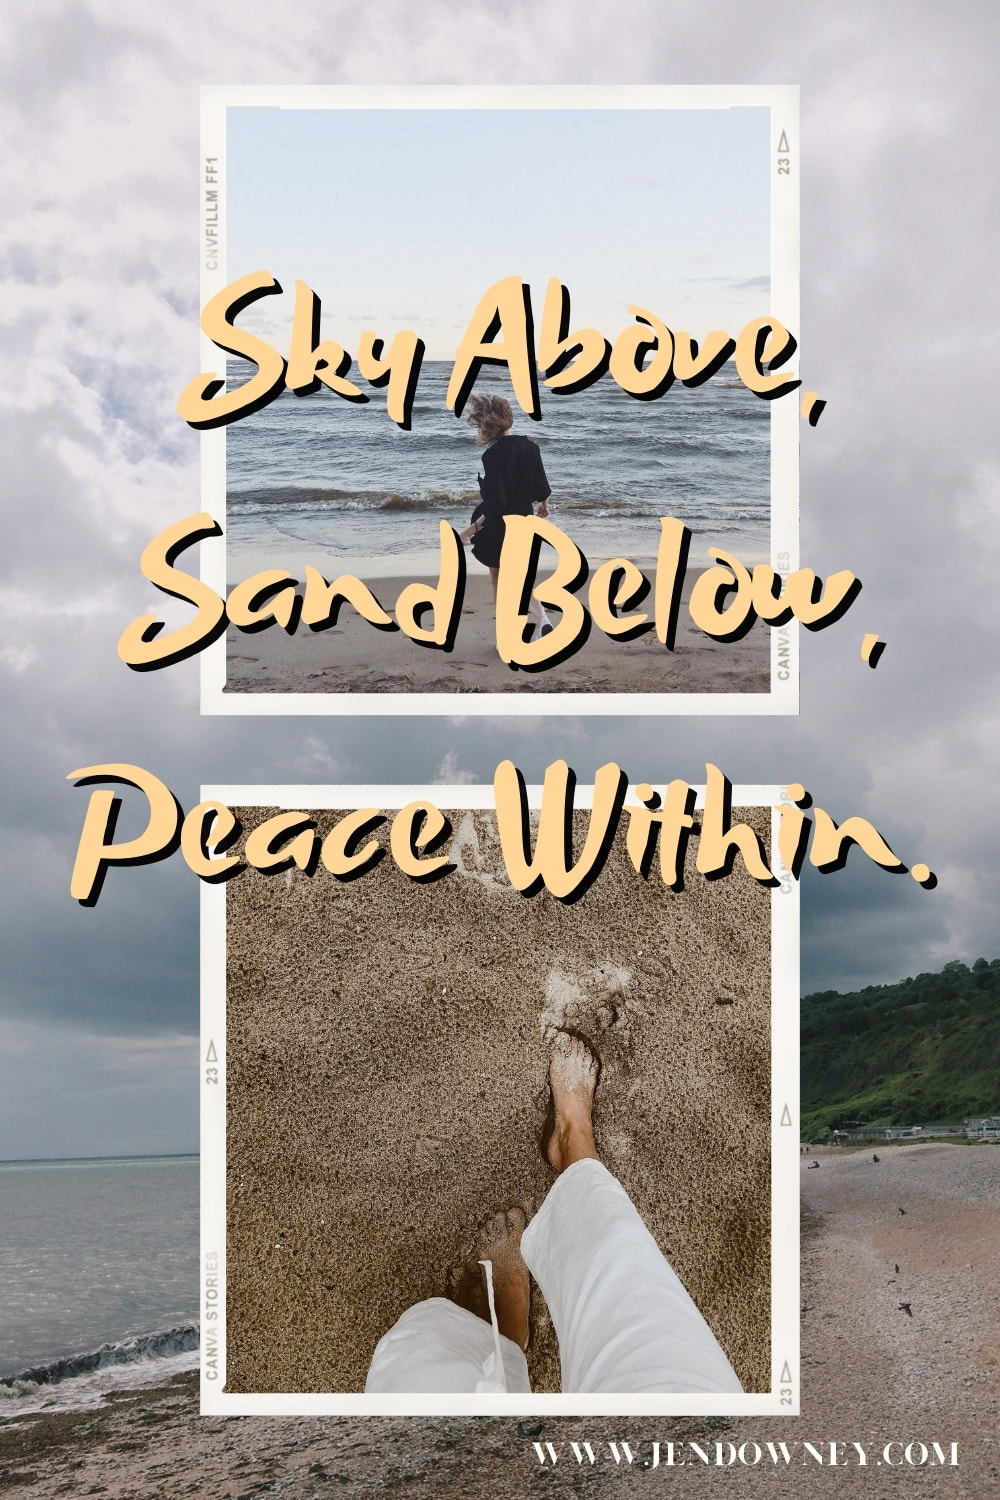 Sky above sand below peace within beach quote